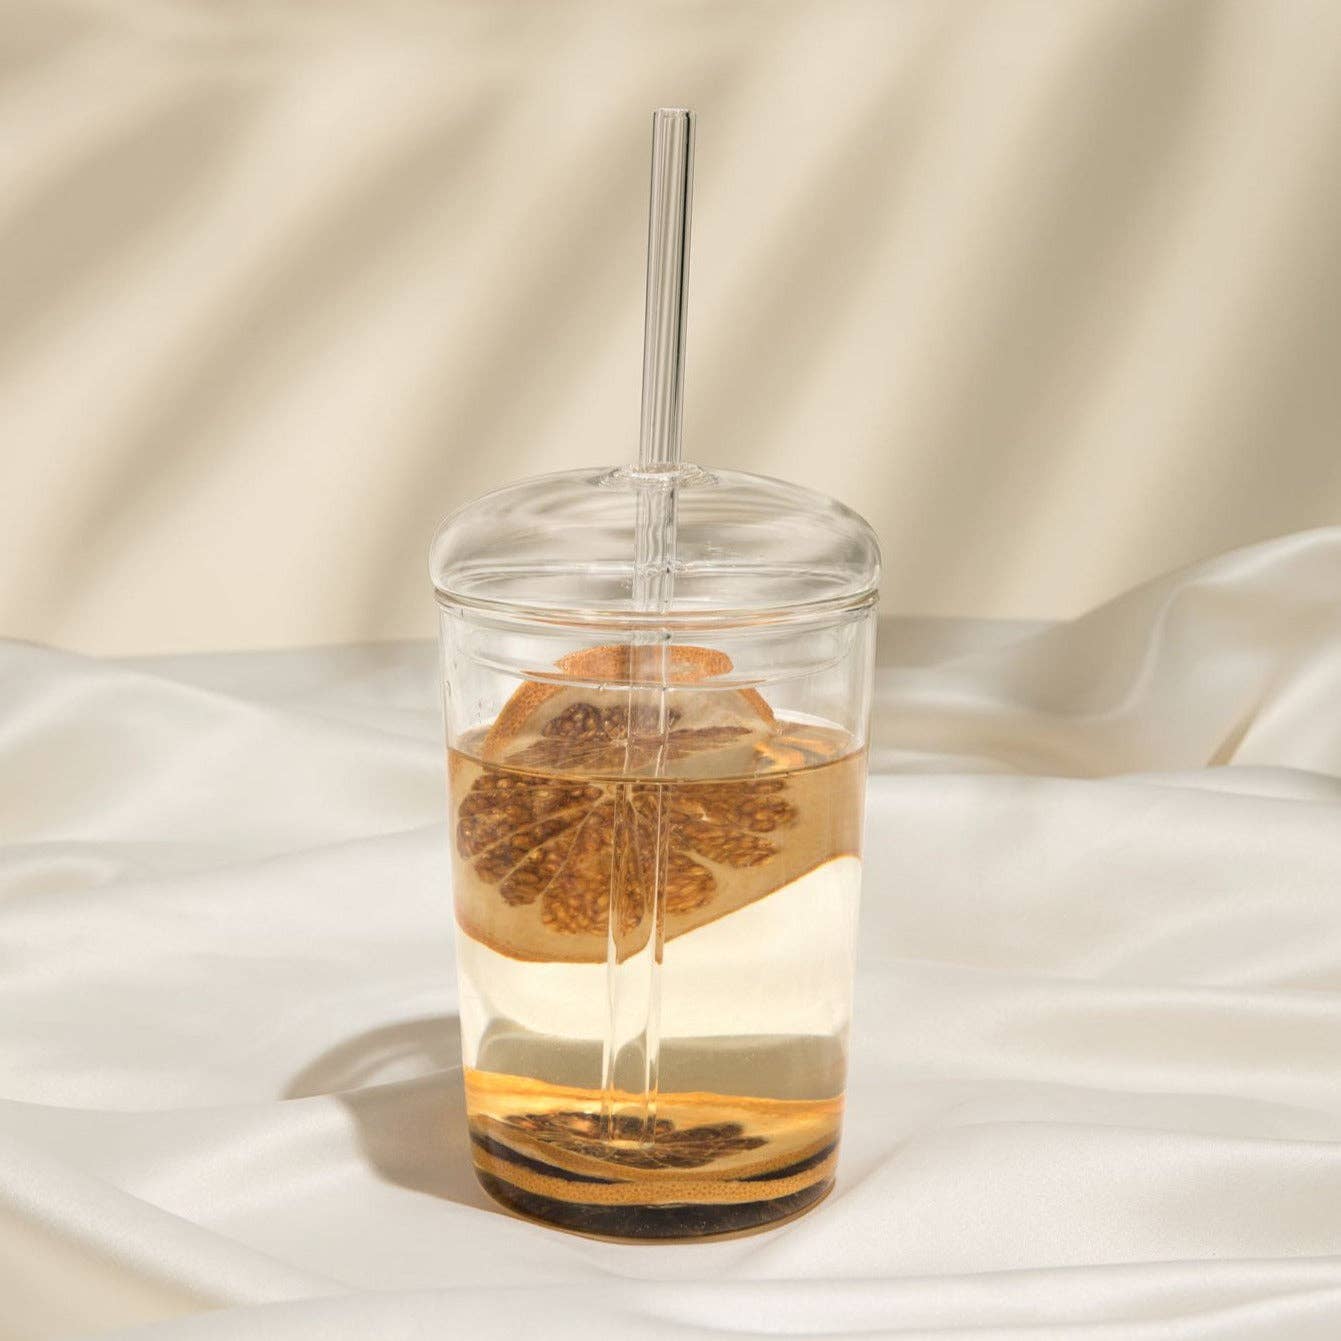 kessellate - Dome Lid Glass Tumbler with straw - Fenwick & Oliverkessellate - Dome Lid Glass Tumbler with strawkessellateFenwick & OliverKESS-DLGT